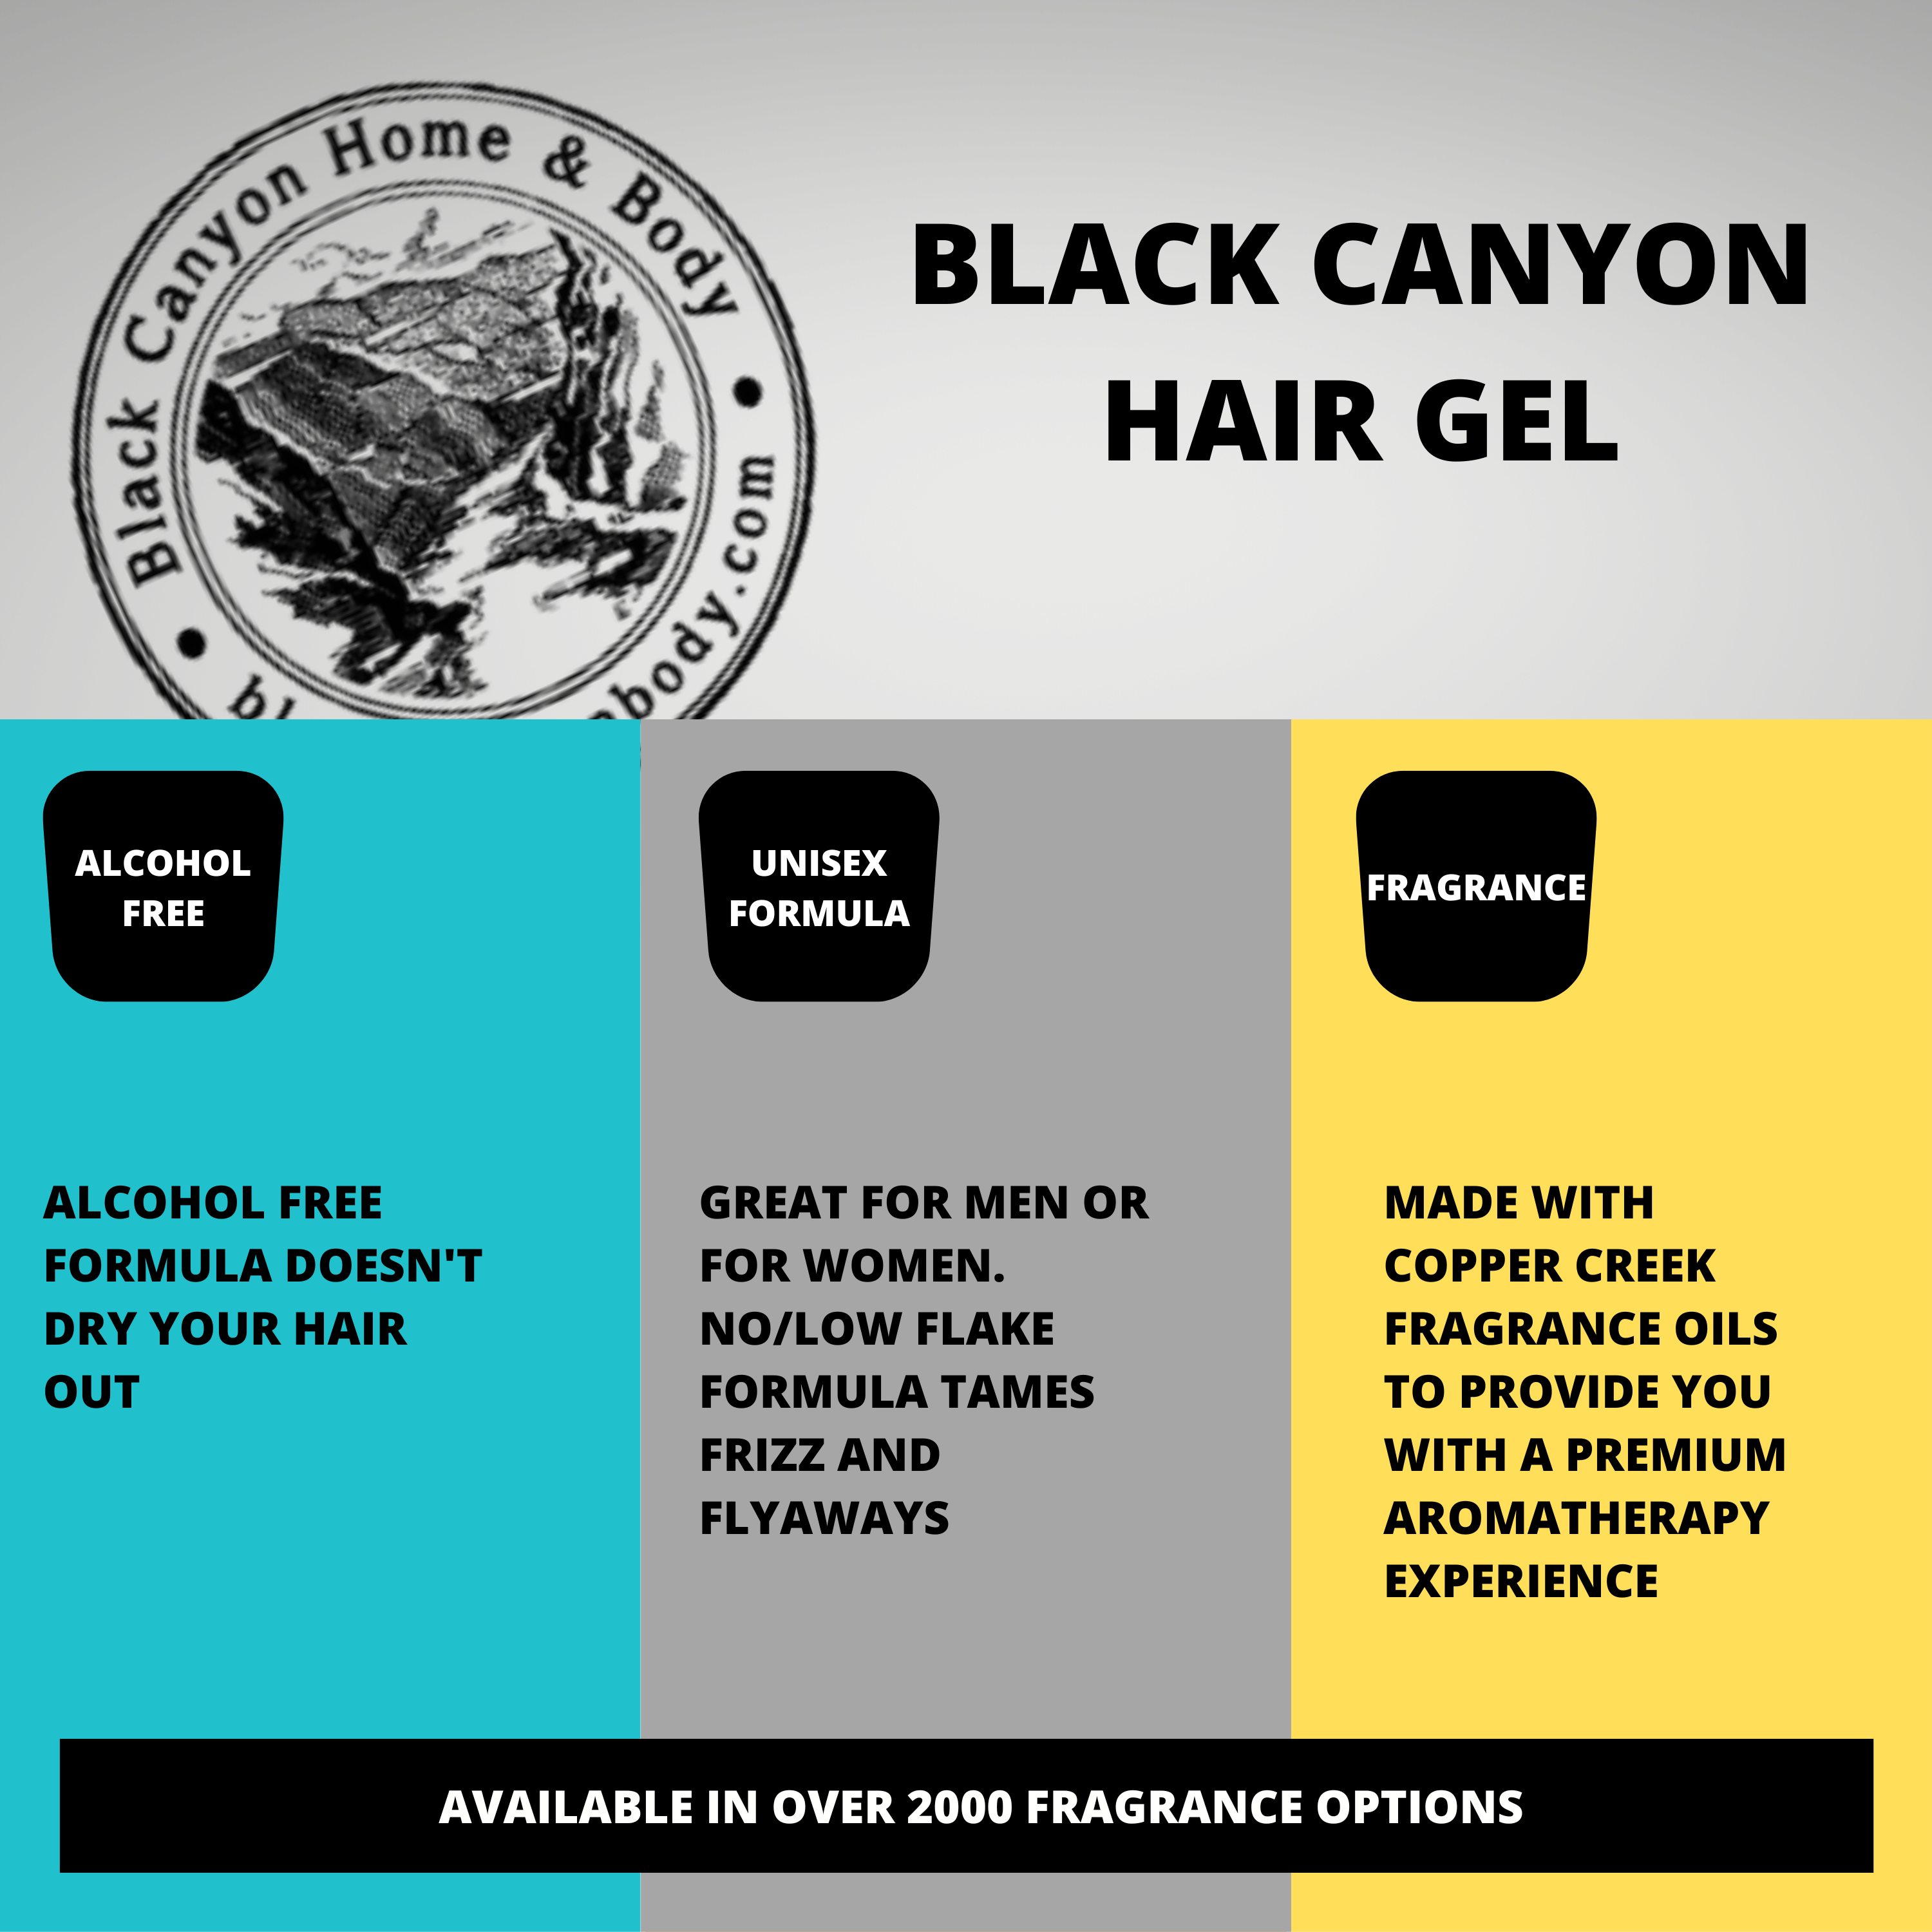 Black Canyon Moonlight Scented Hair Gel